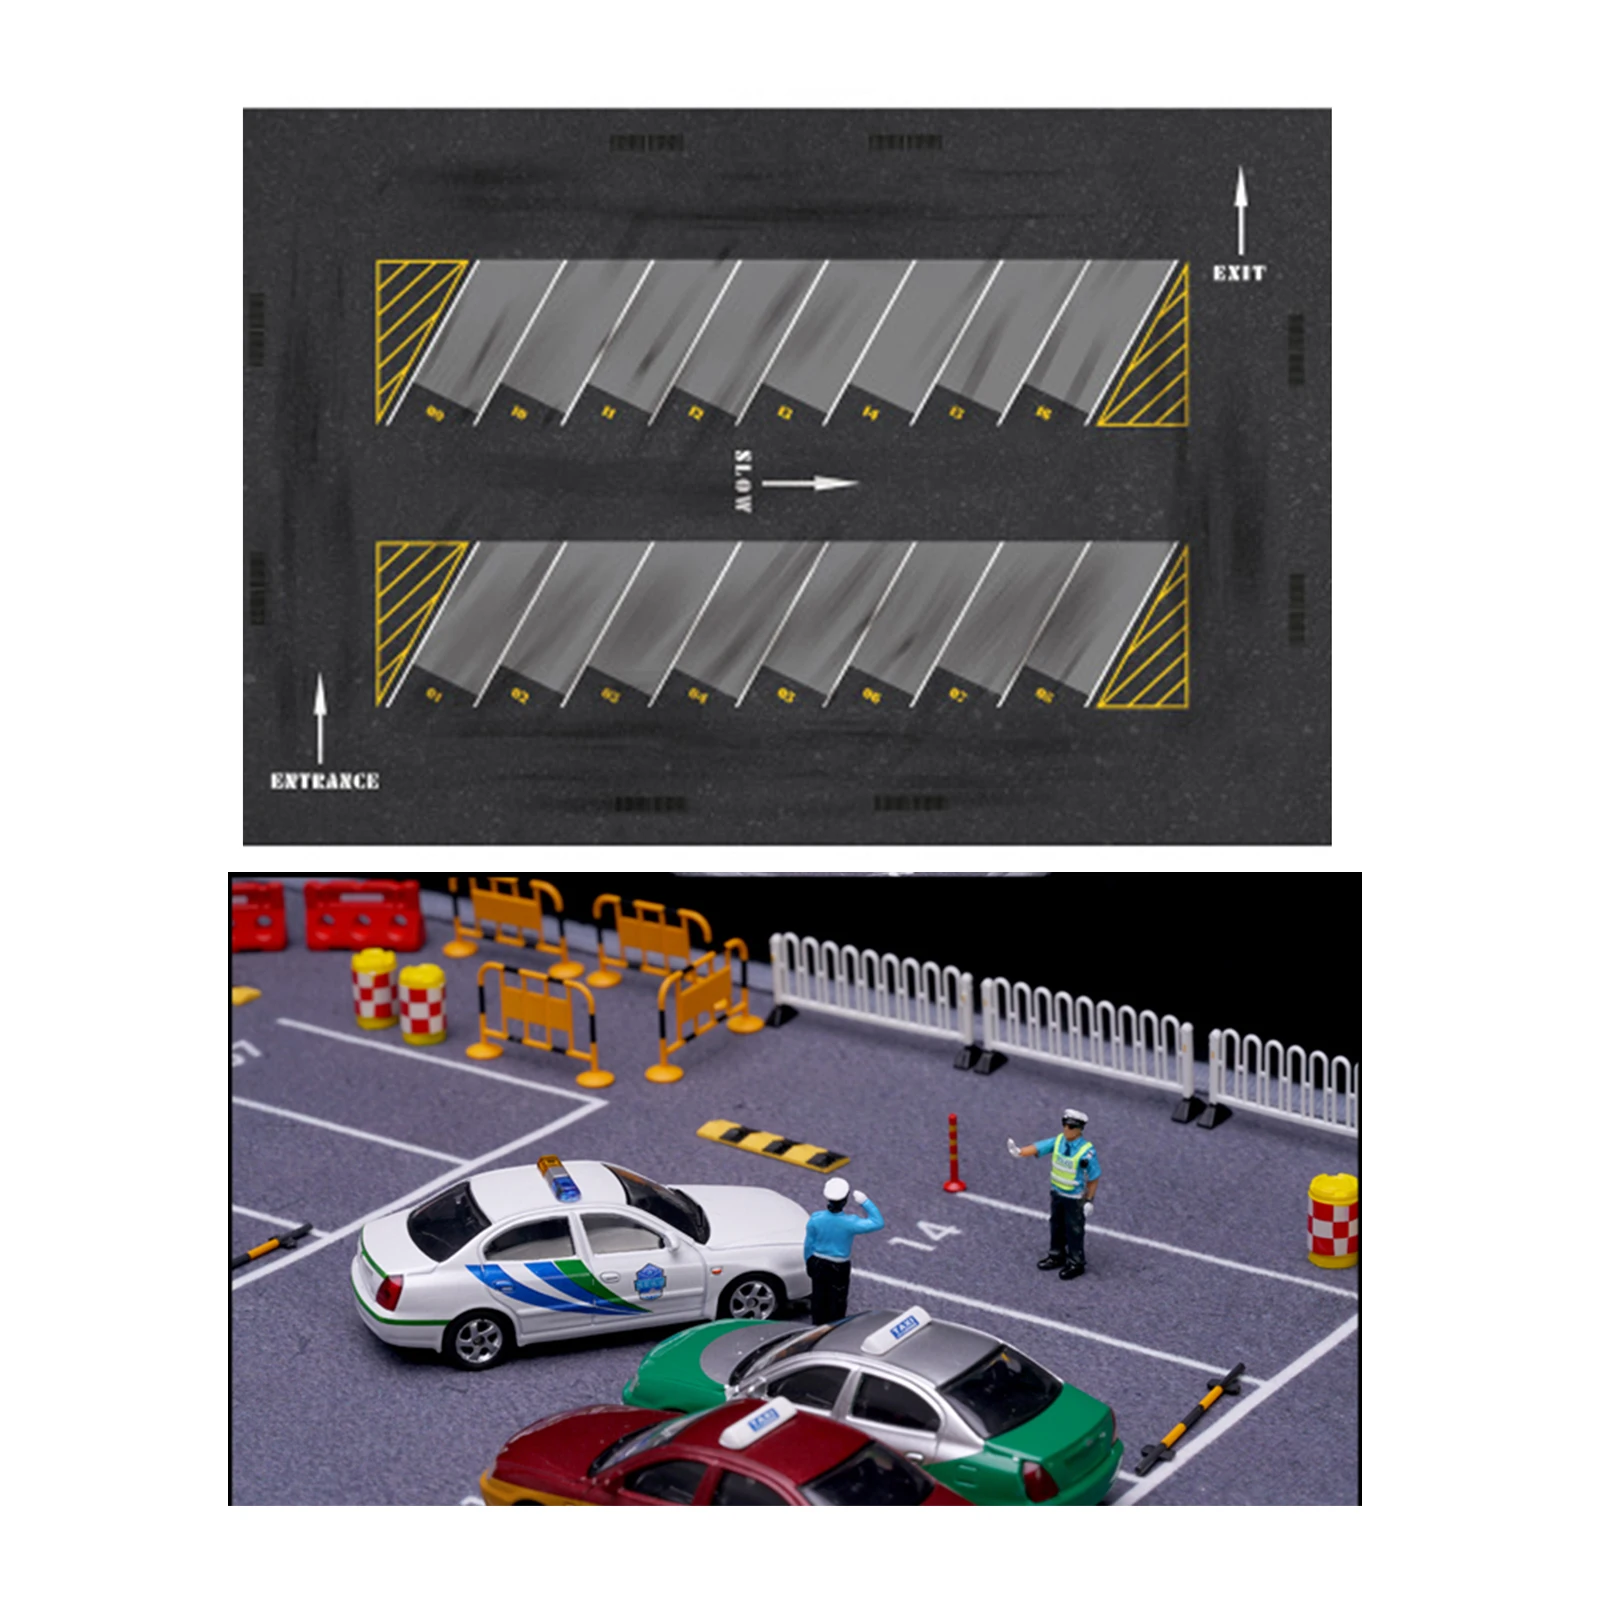 Non-Slip Parking , Display Smooth Surface Washable Model  Cloth&Rubber Mouse Pad, 1:64 for Home Simulation Toy Cars Display